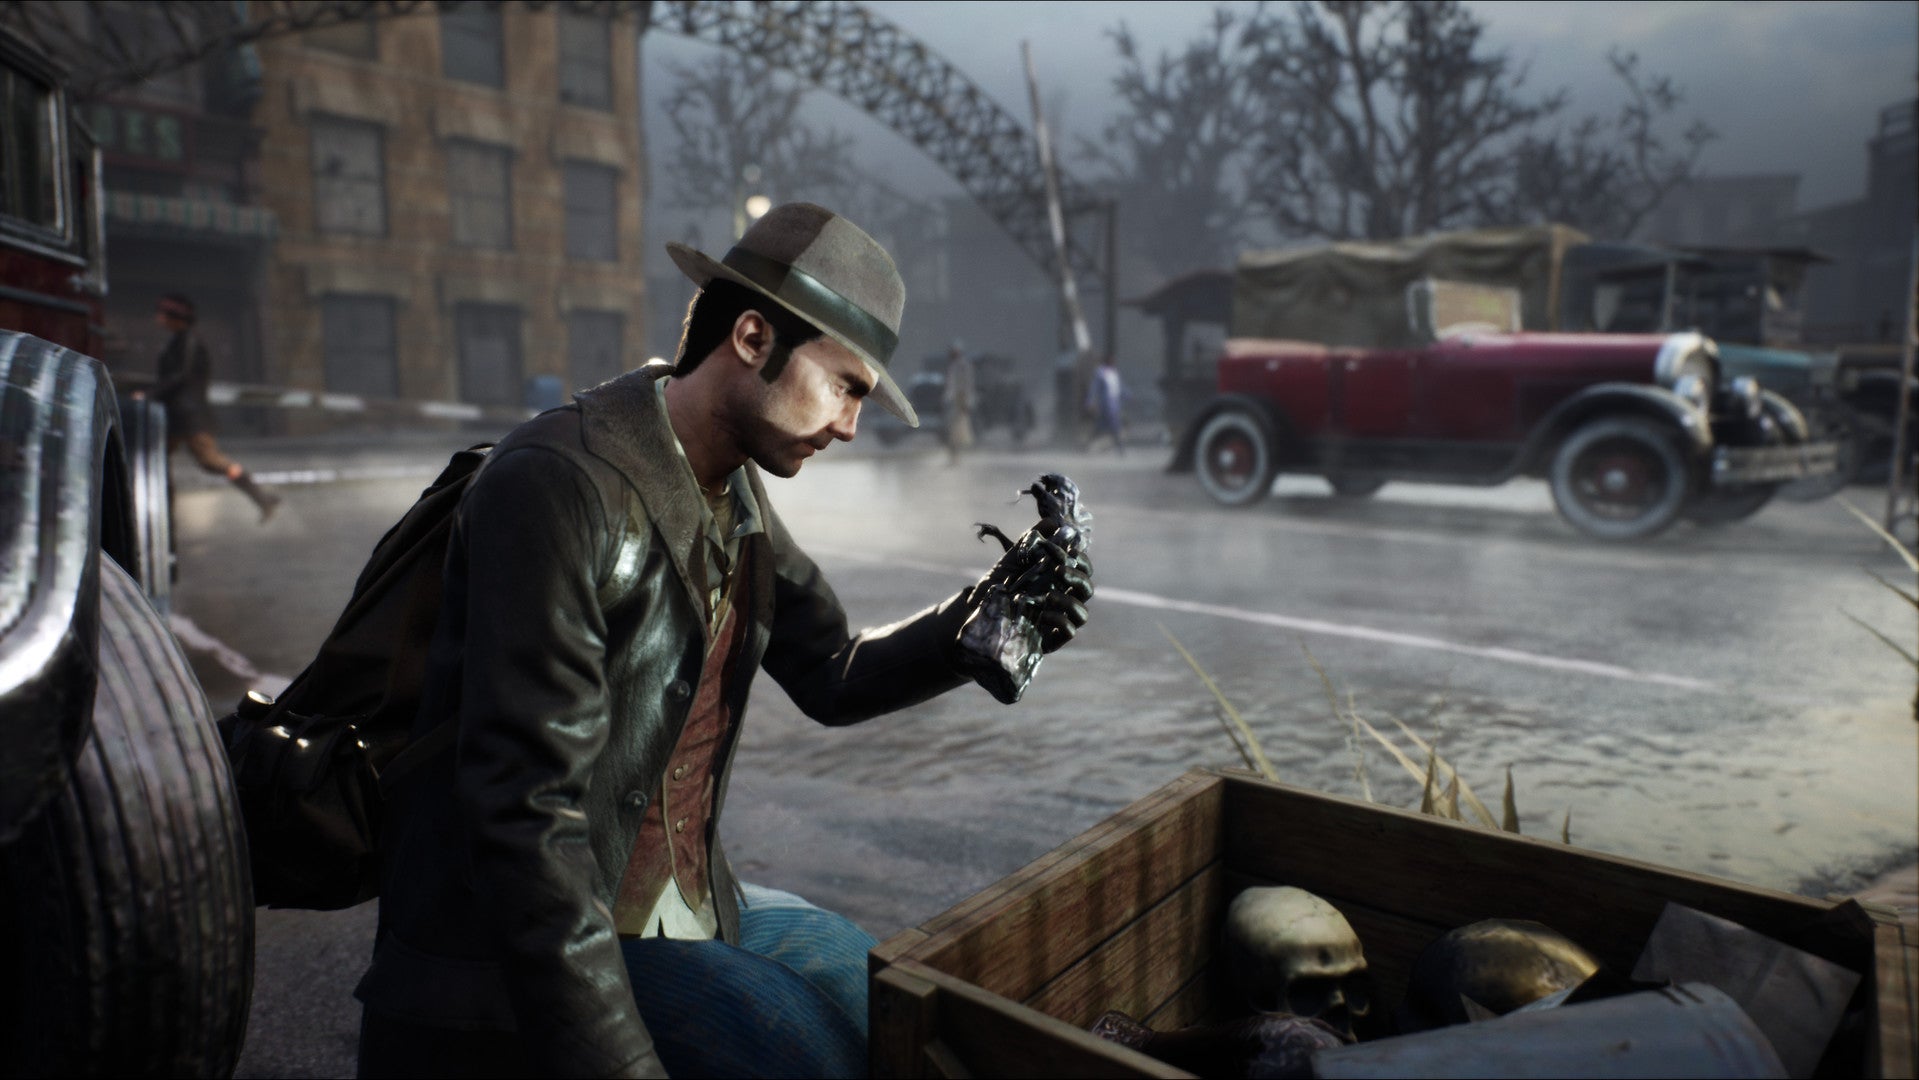 Image for The Sinking City developer asks users not to buy its game on Steam